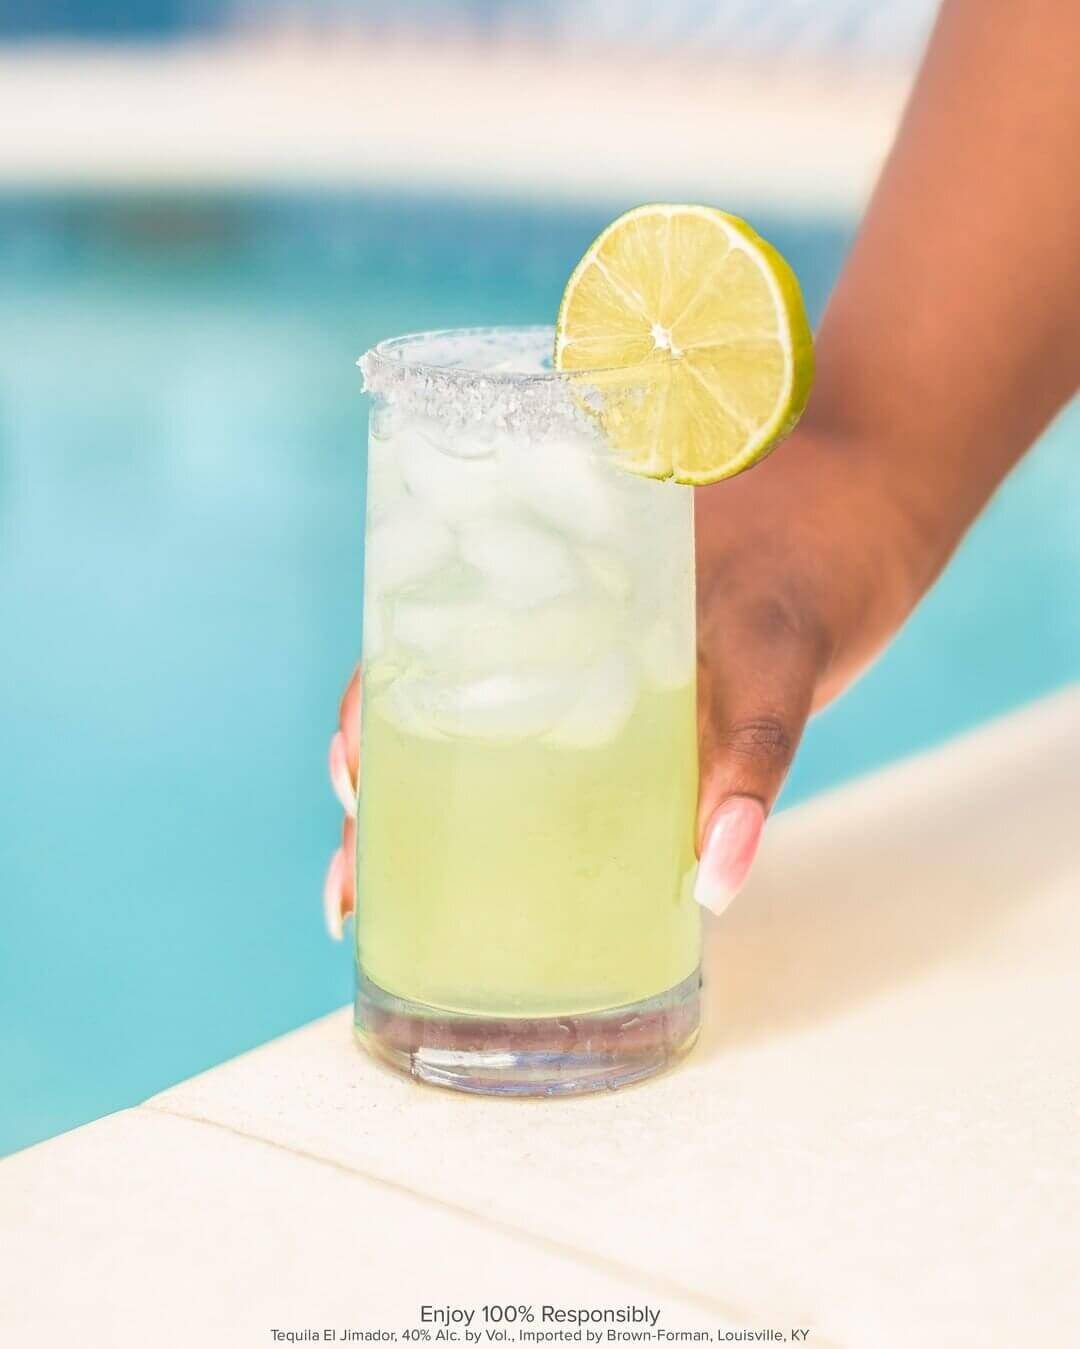 Close-up photo of woman's hand holding margarita near the edge of a pool 